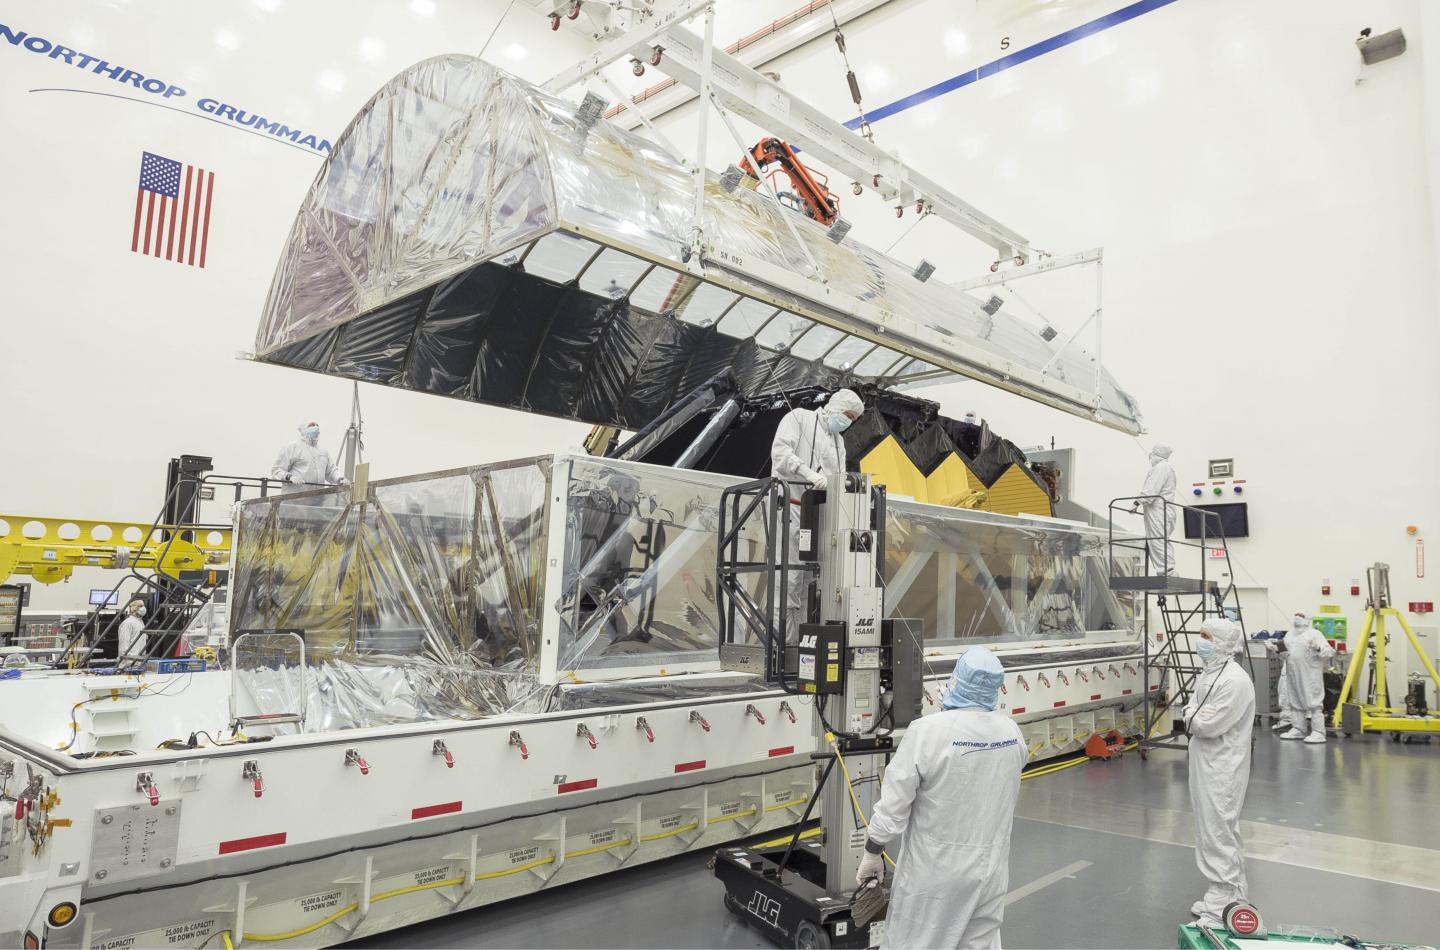 Engineers Open the Interior Tent Frame of the Space Telescope Transporter